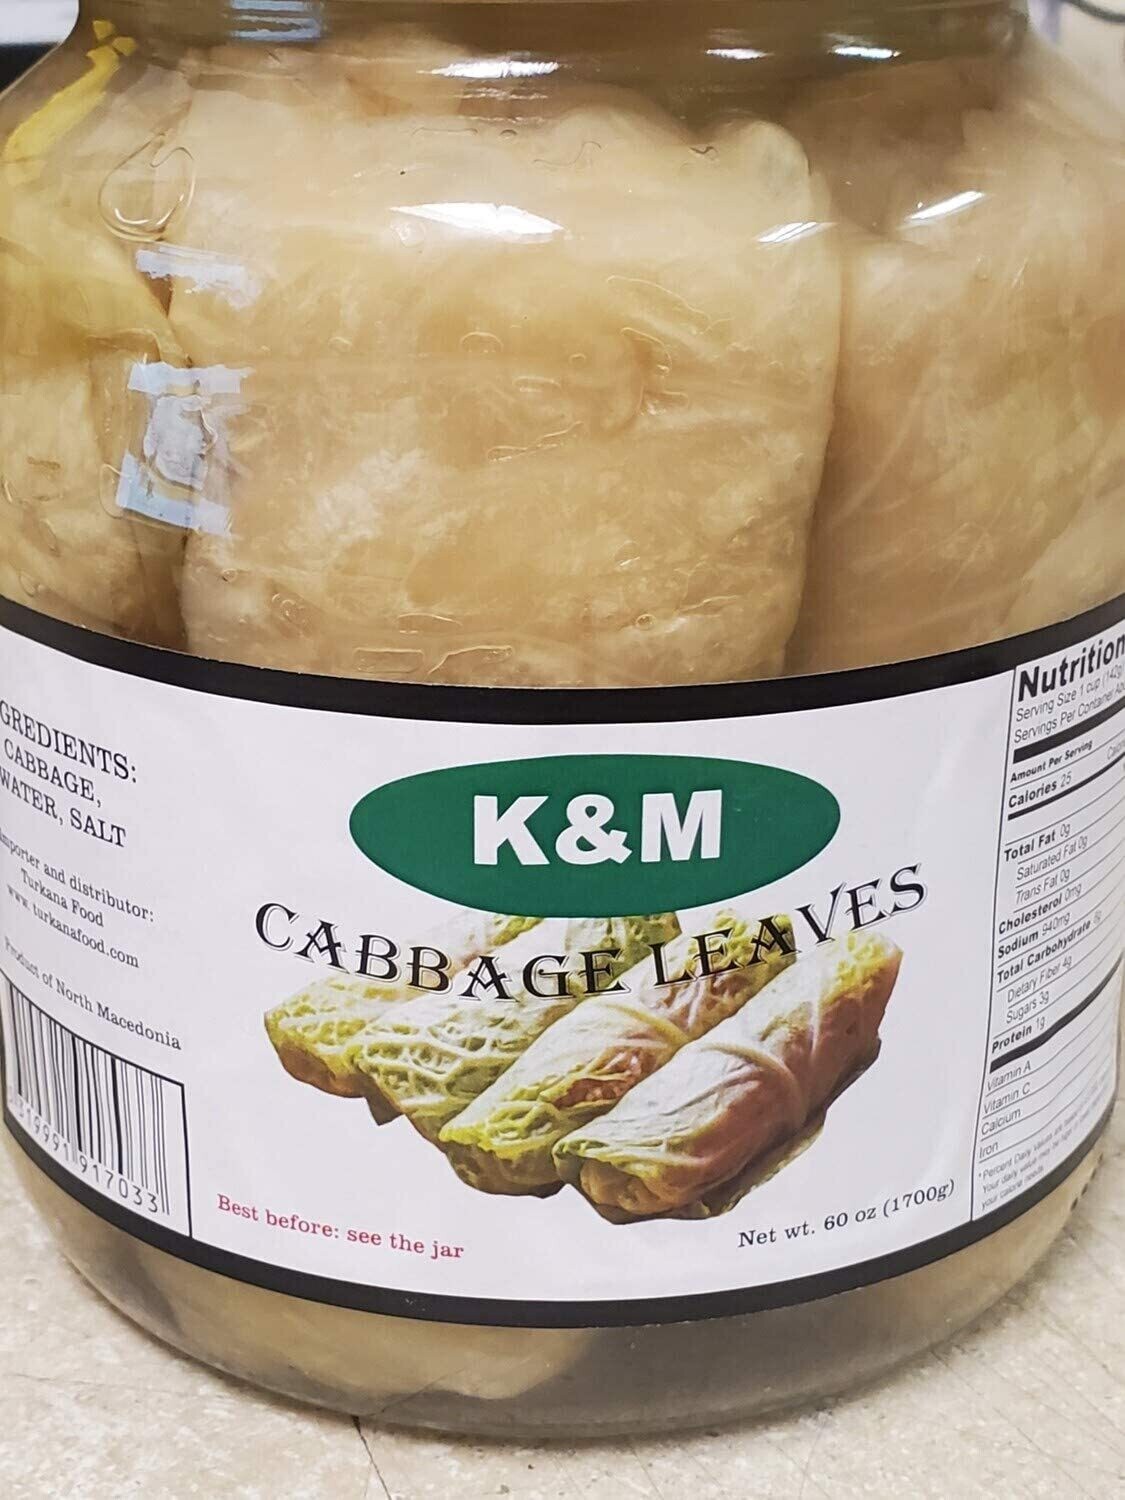 K&M Cabbage Leaves - 1600gr in Brine - Halal- Product of Bulgaria